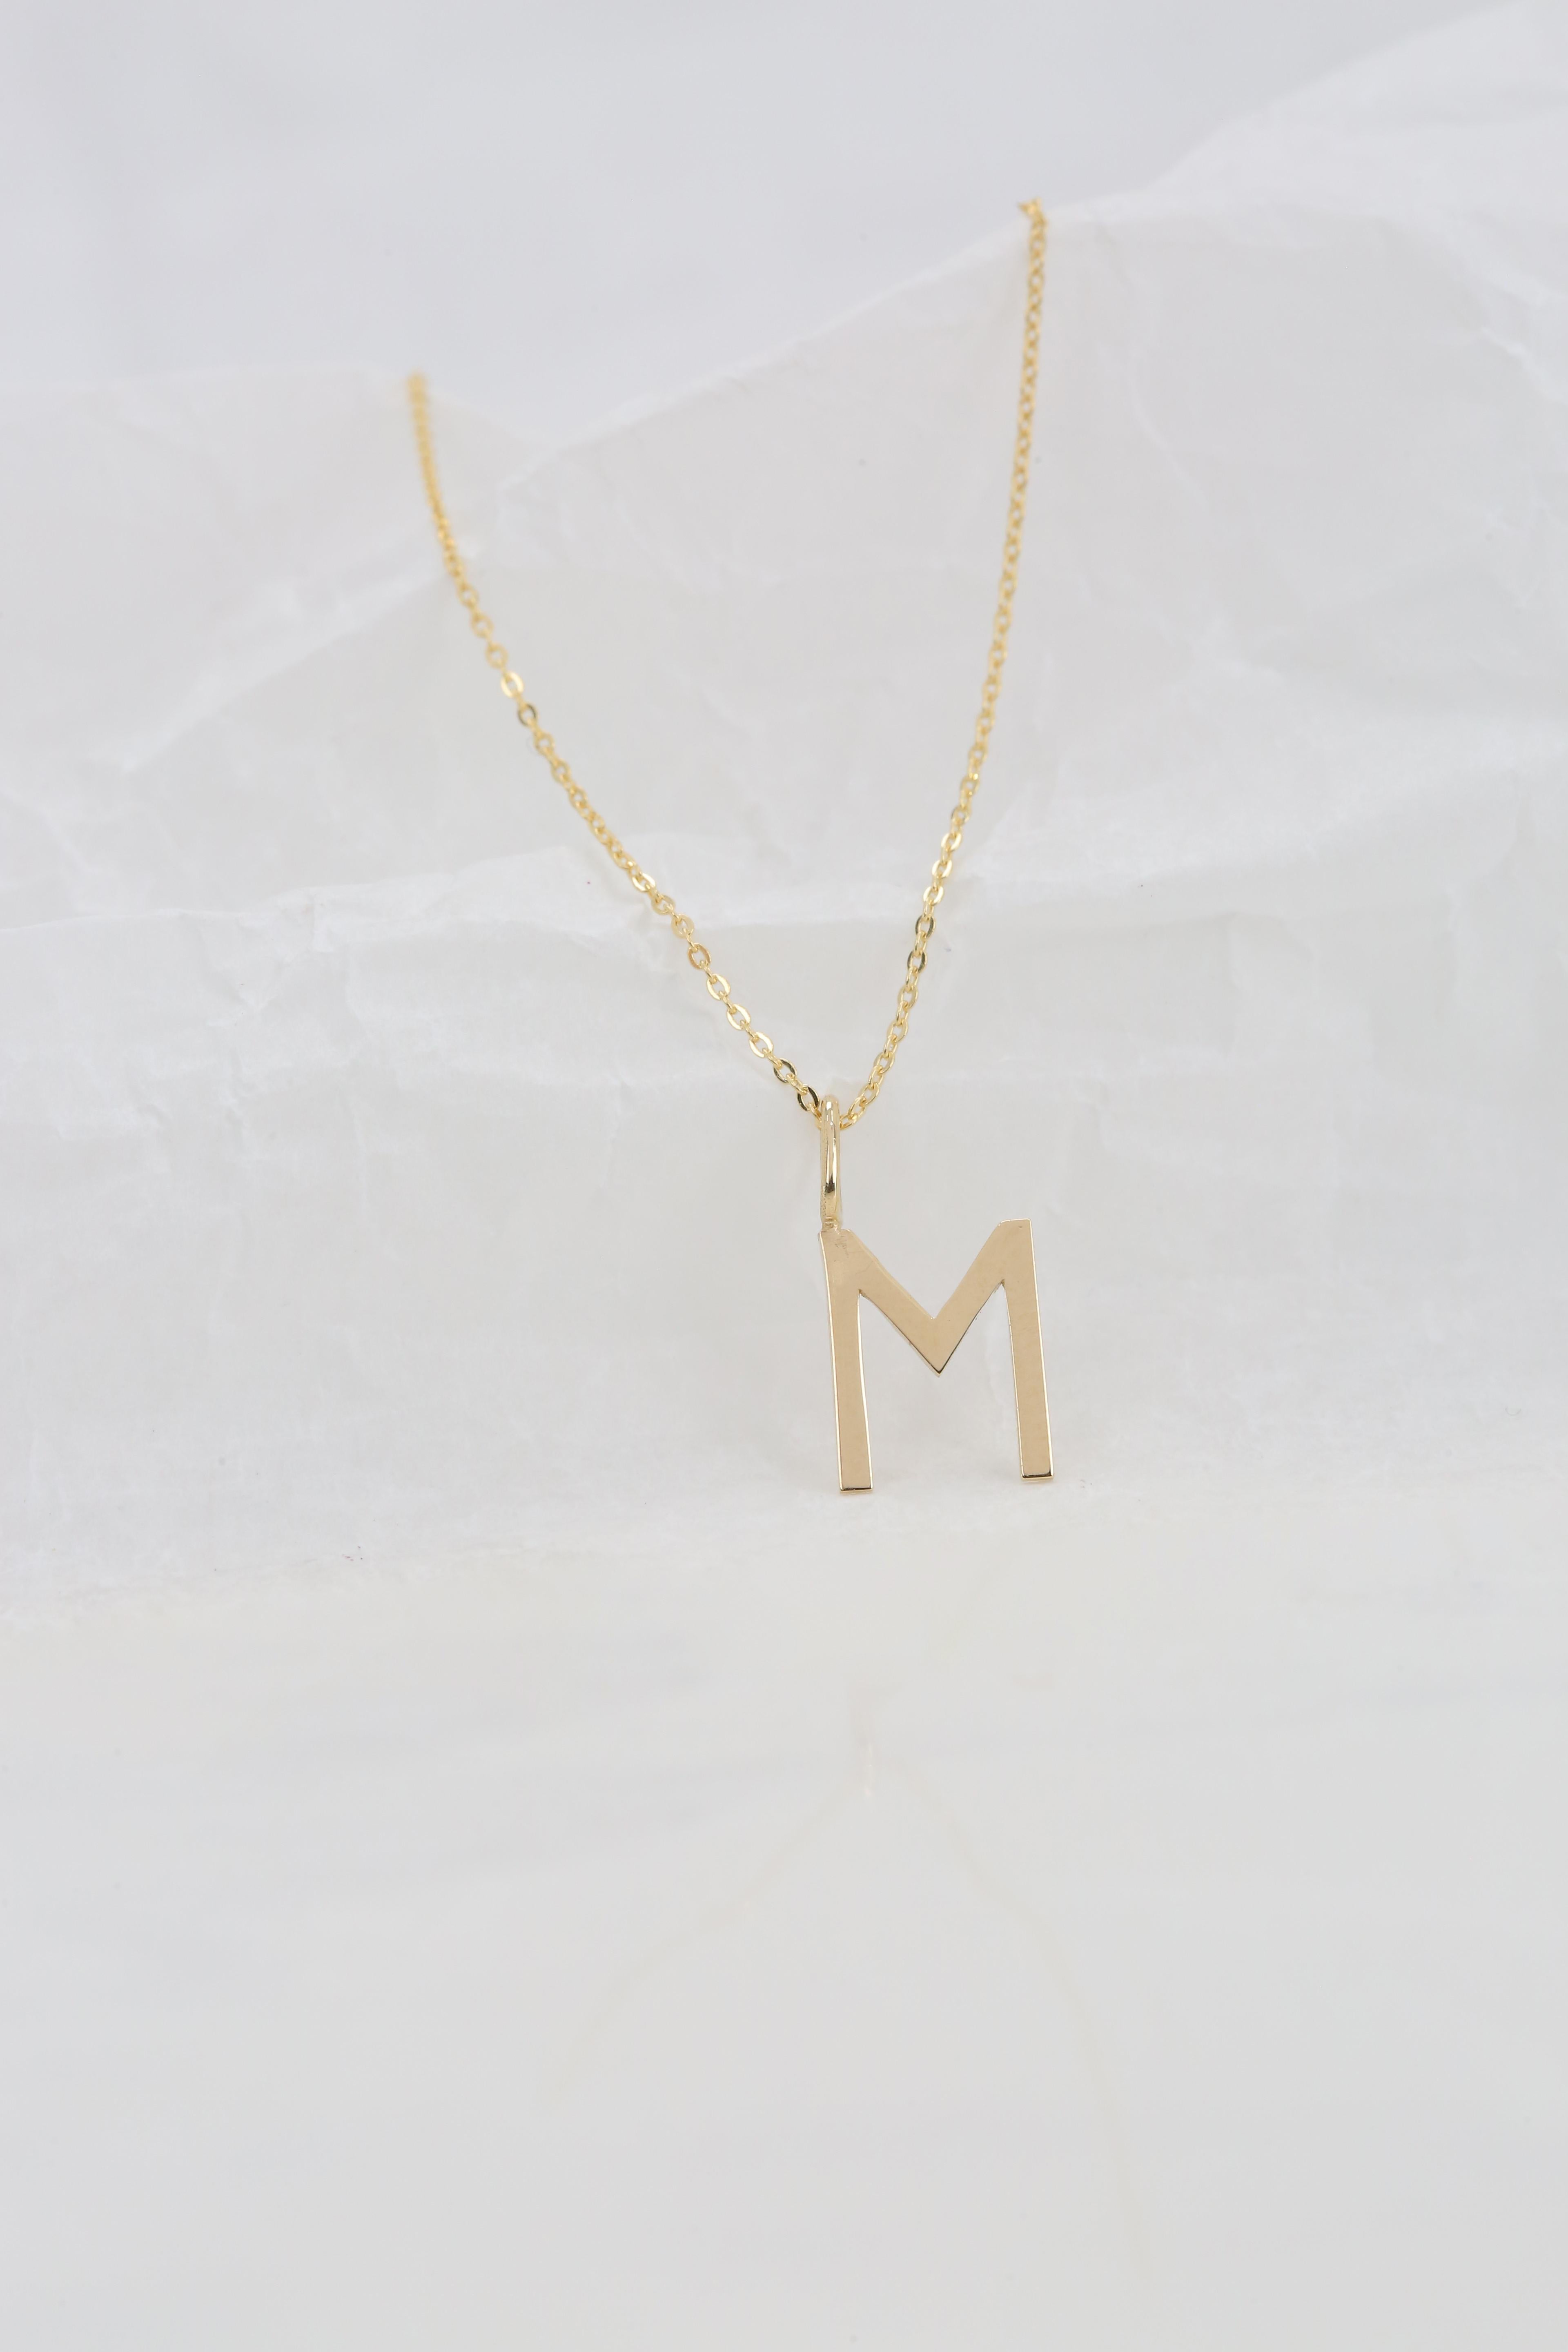 gold m necklace